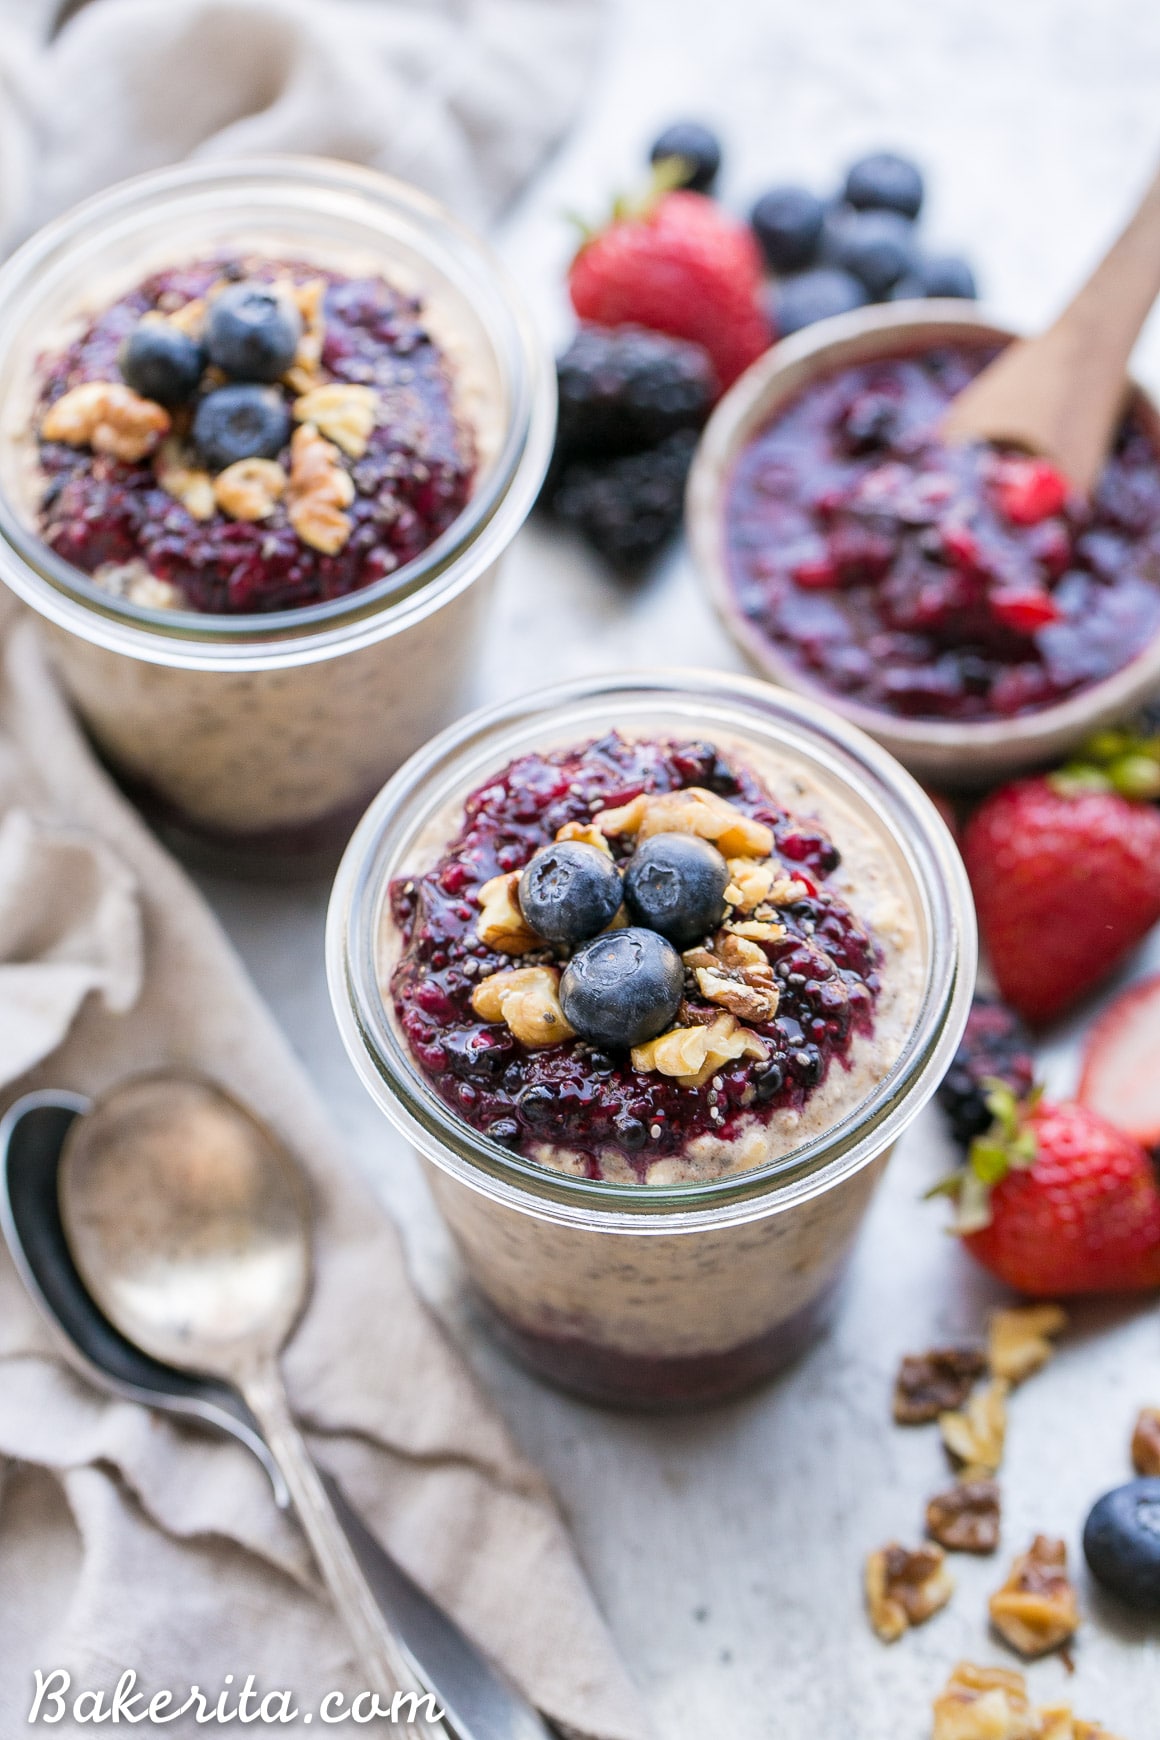 These Superfood Overnight Oats with Easy Berry Chia Jam are the perfect filling breakfast, loaded with superfoods to give your day a kickstart. This gluten-free, refined sugar-free and vegan recipe can be prepped in a just few minutes for a delicious grab-and-go breakfast.